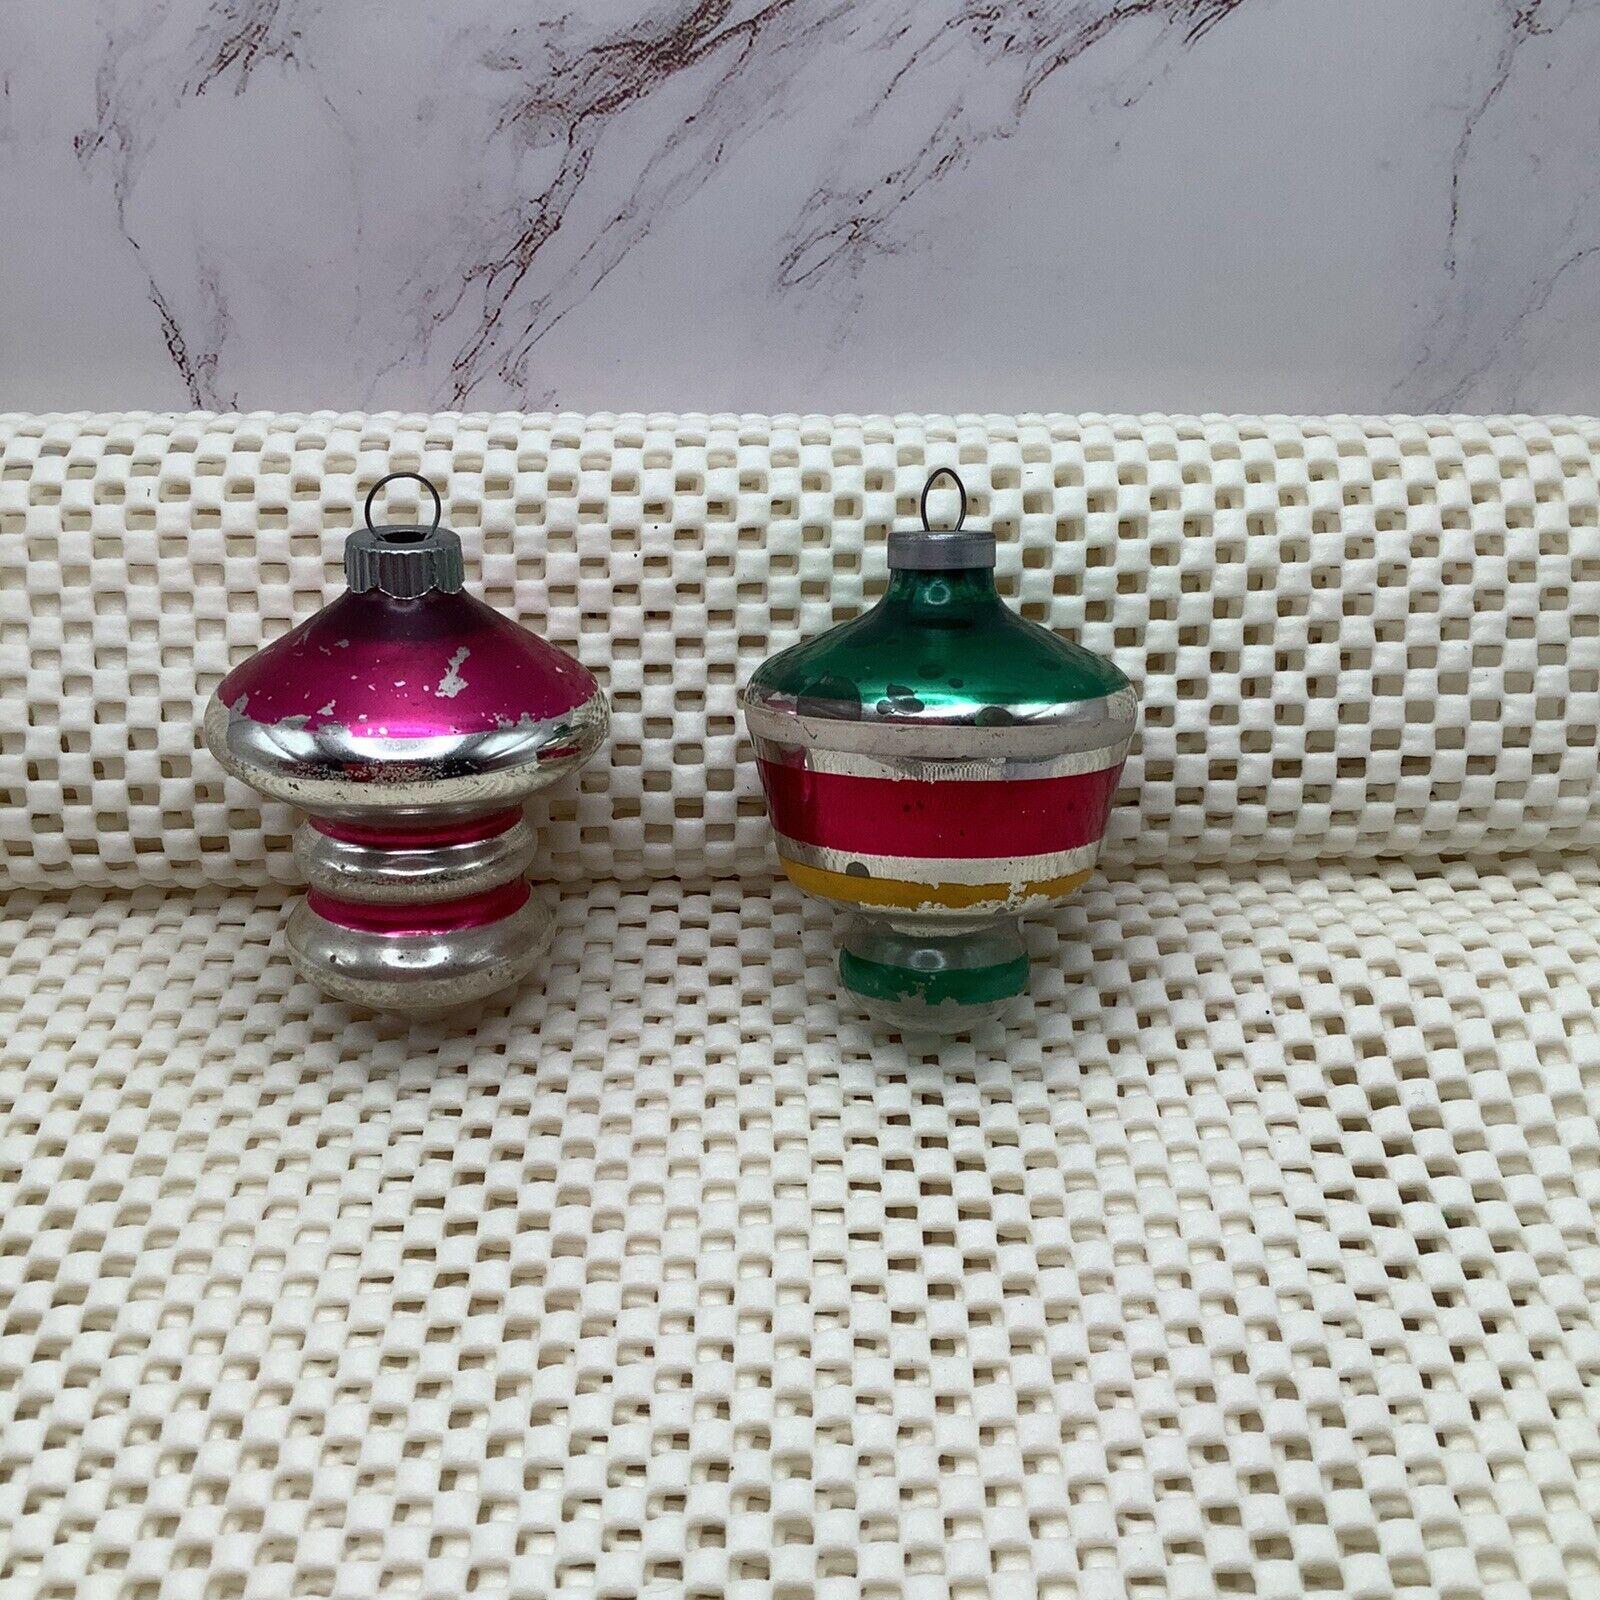 Vintage Mercury Glass Shiny Brite UFO Style Ornaments Set Of Two Made In U.S.A